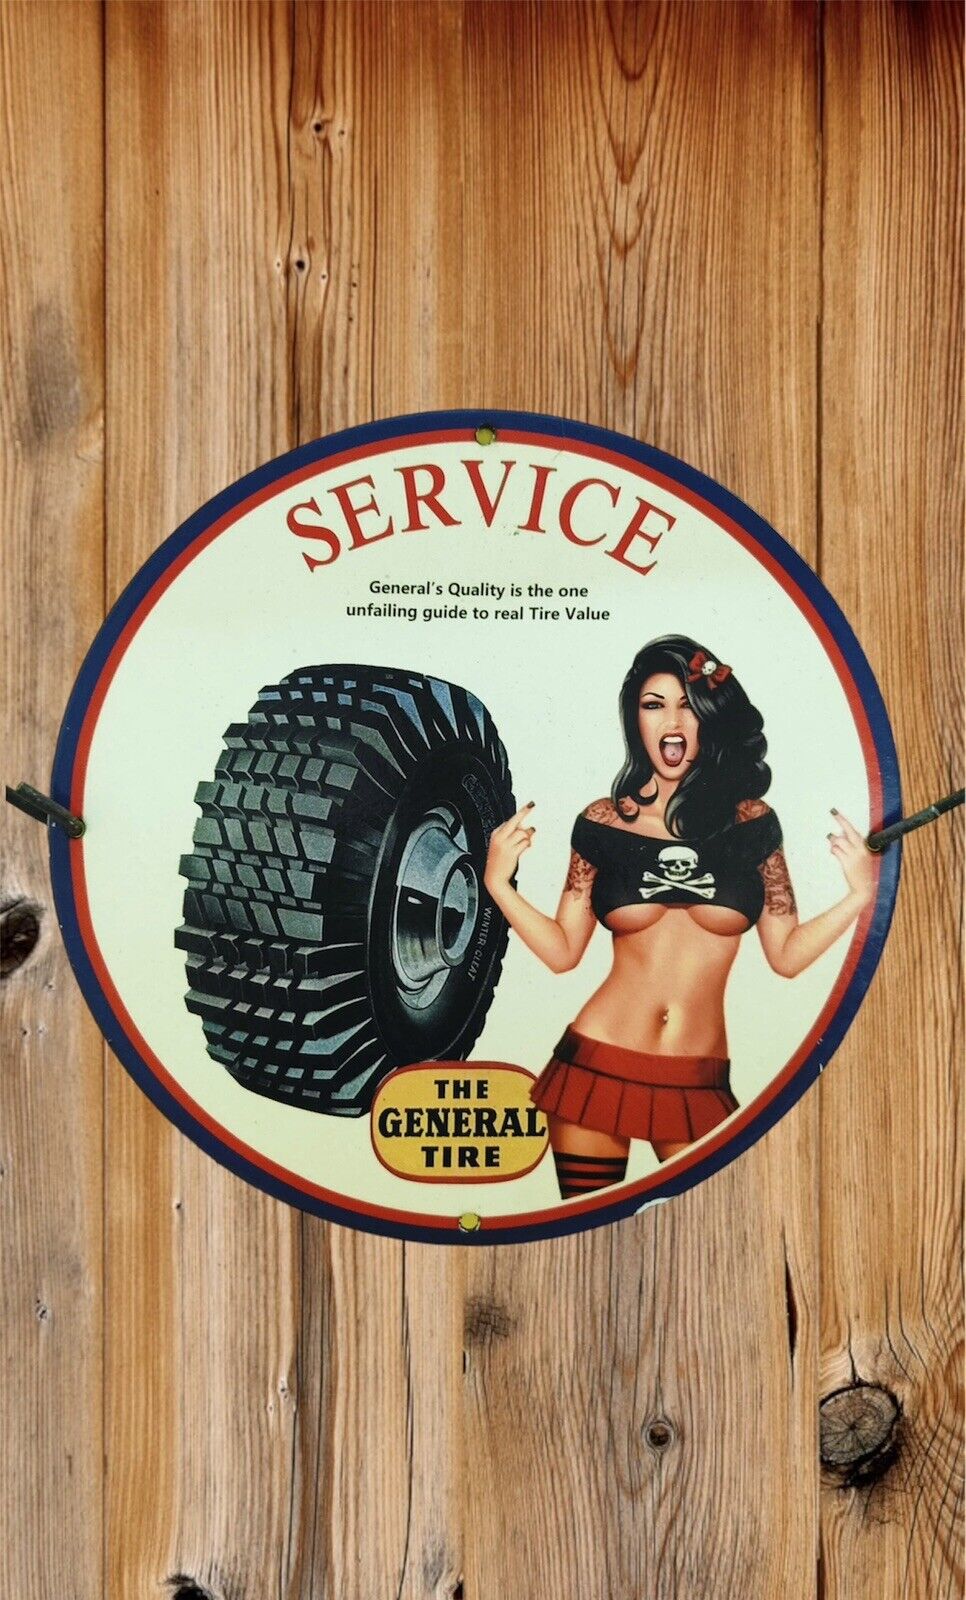 THE GENERAL TIRE SERVICE PINUP GOTH BABE PORCELAIN GAS SERVICE OIL PUMP AD SIGN